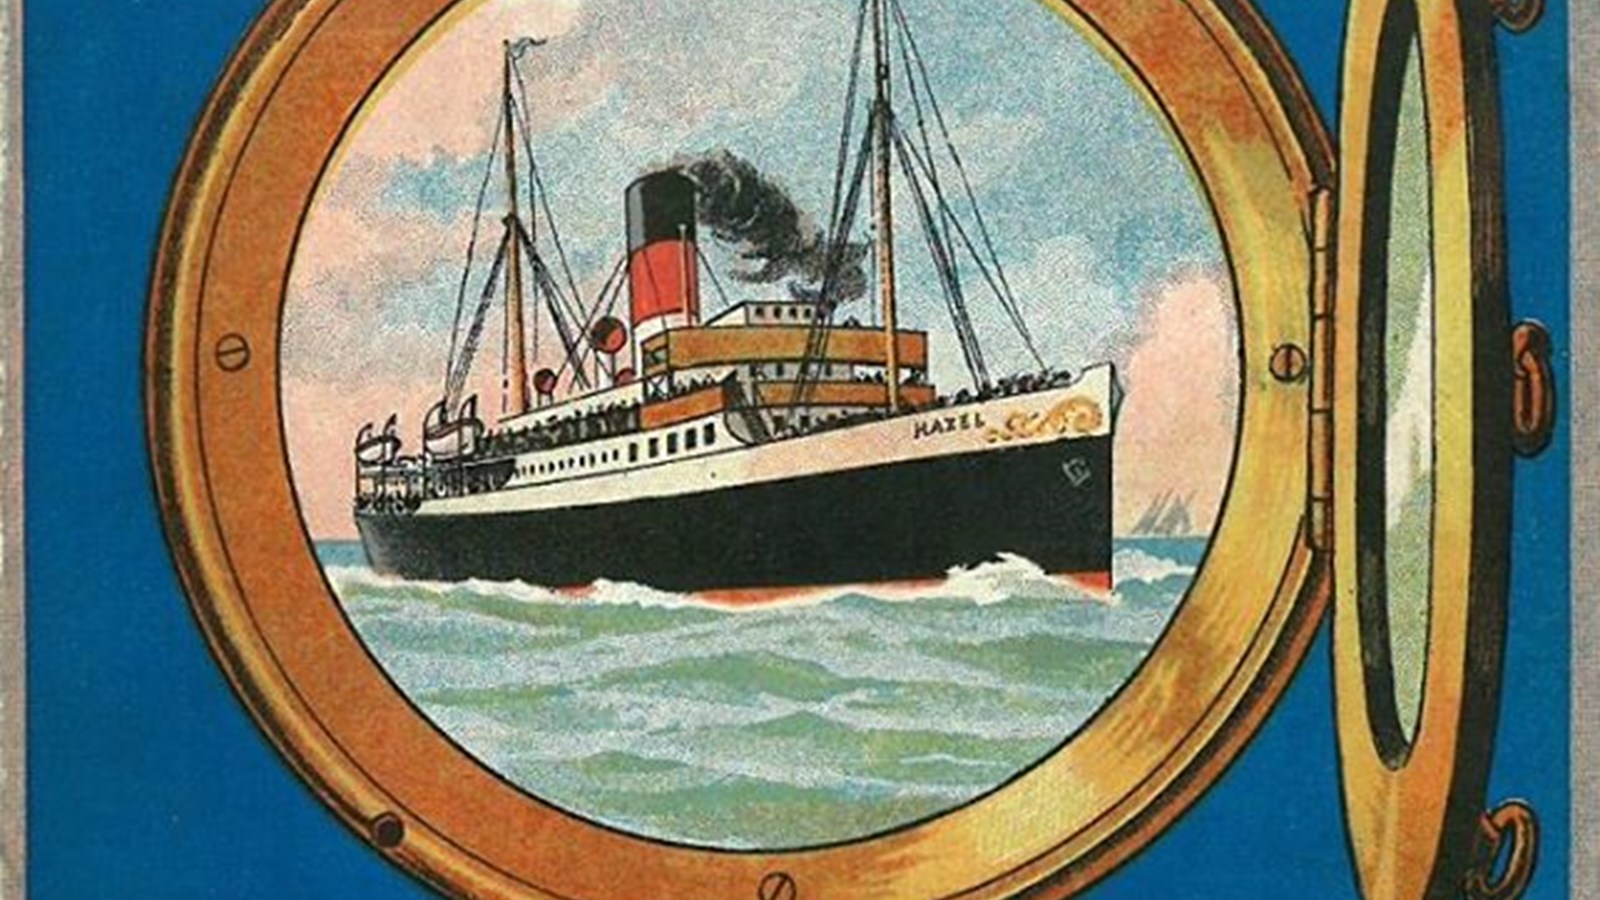 An advertisement poster for for 1908 season of Laird Line Ltd tours in Ireland, with a blue background and an illustration of a ship sailing on choppy waters seen through an open brass port hole.